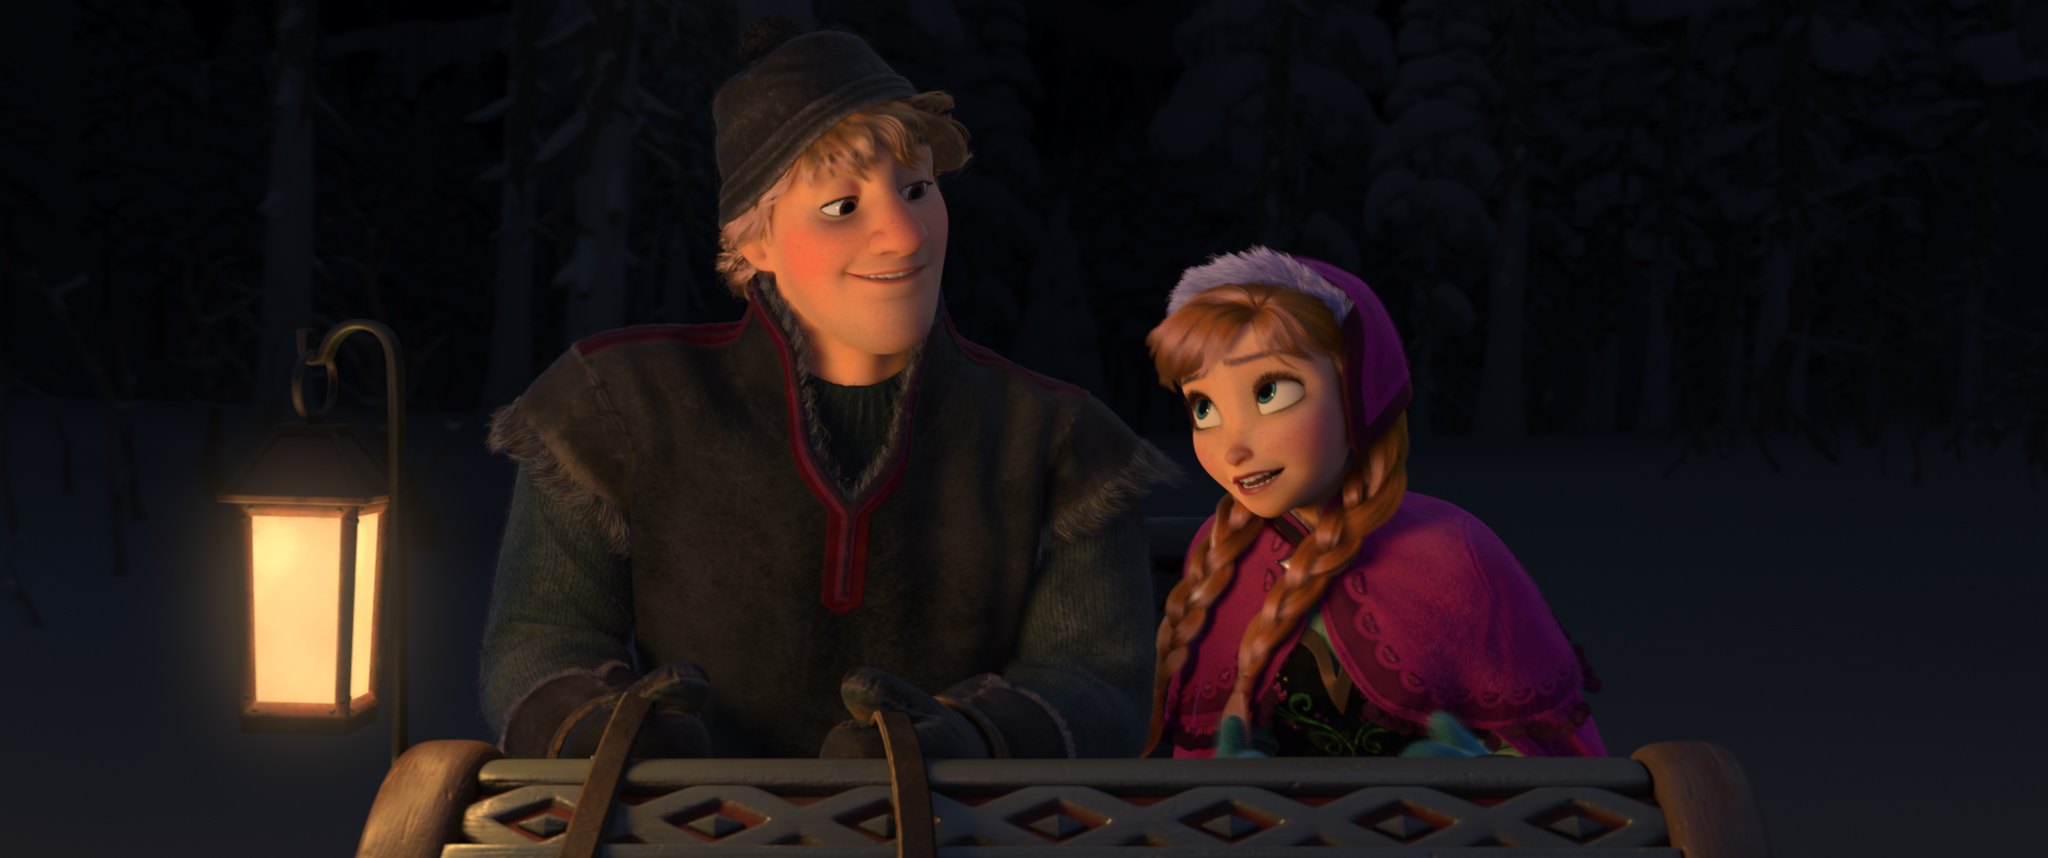 FROZEN: Why CGI Iteration Wins Over Hand-drawn — GeekTyrant